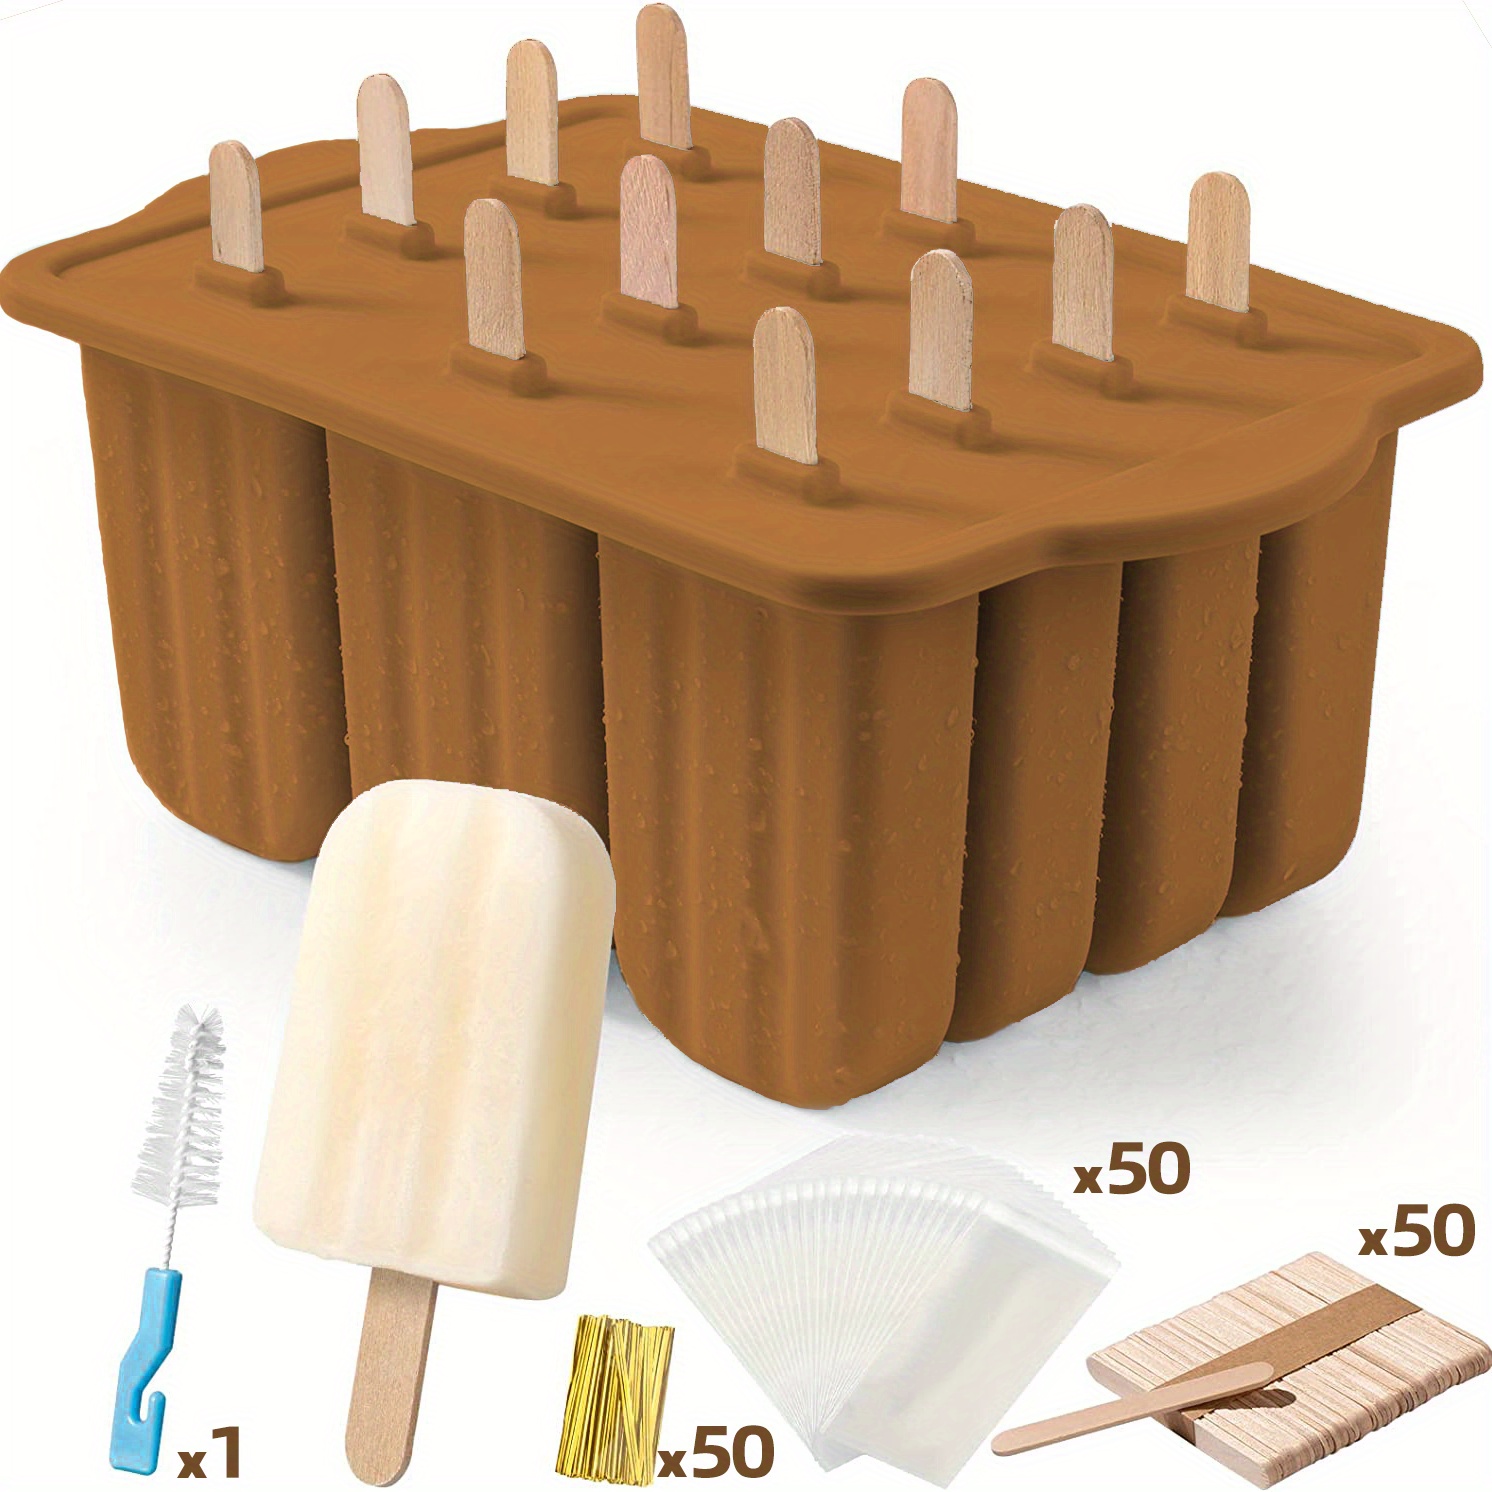 Homemade Popsicle Molds Shapes, Food Grade Silicone Frozen Ice Popsicle Maker-BPA Free, with 62 Popsicle Sticks 50 Popsicle Bags(10 Cavities)